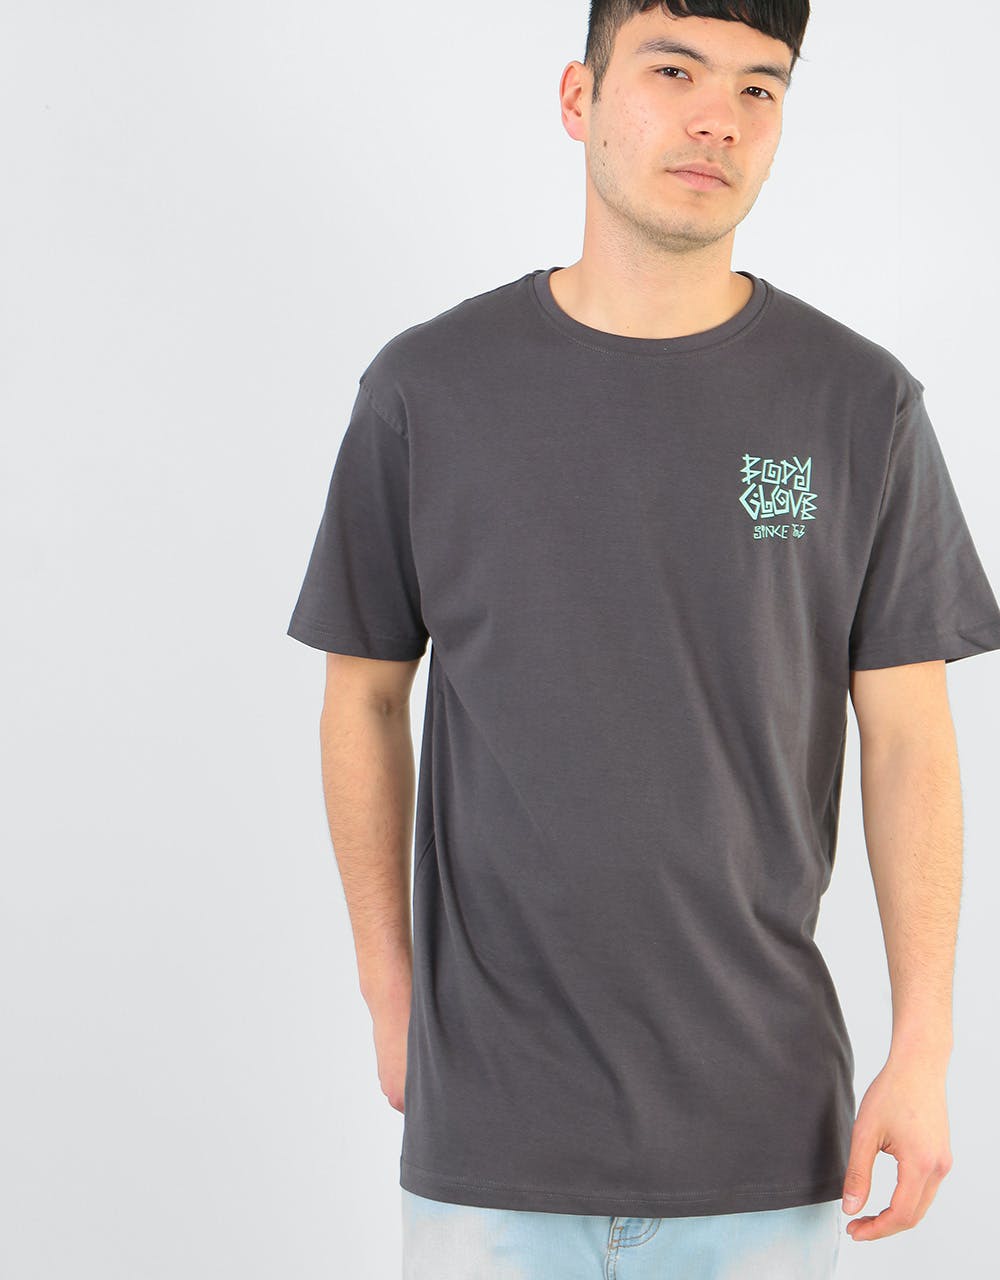 Body Glove Kindred T-Shirt - Washed Black